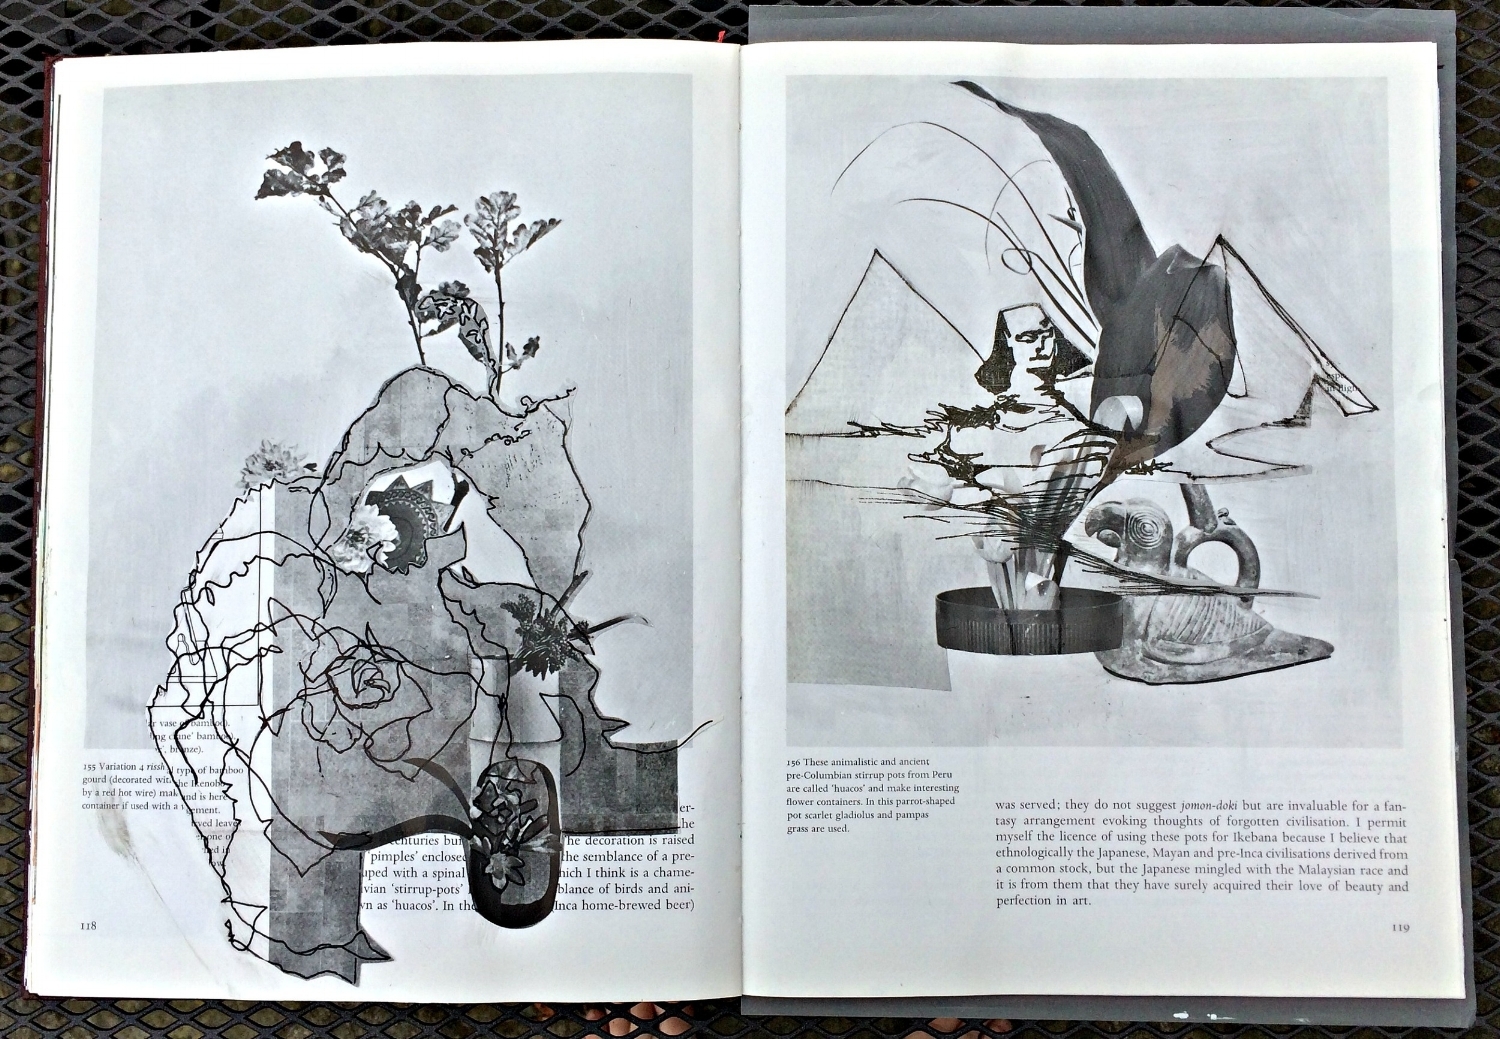 Altered Book (Japanese Flower Arranging): unsighted sketches layered